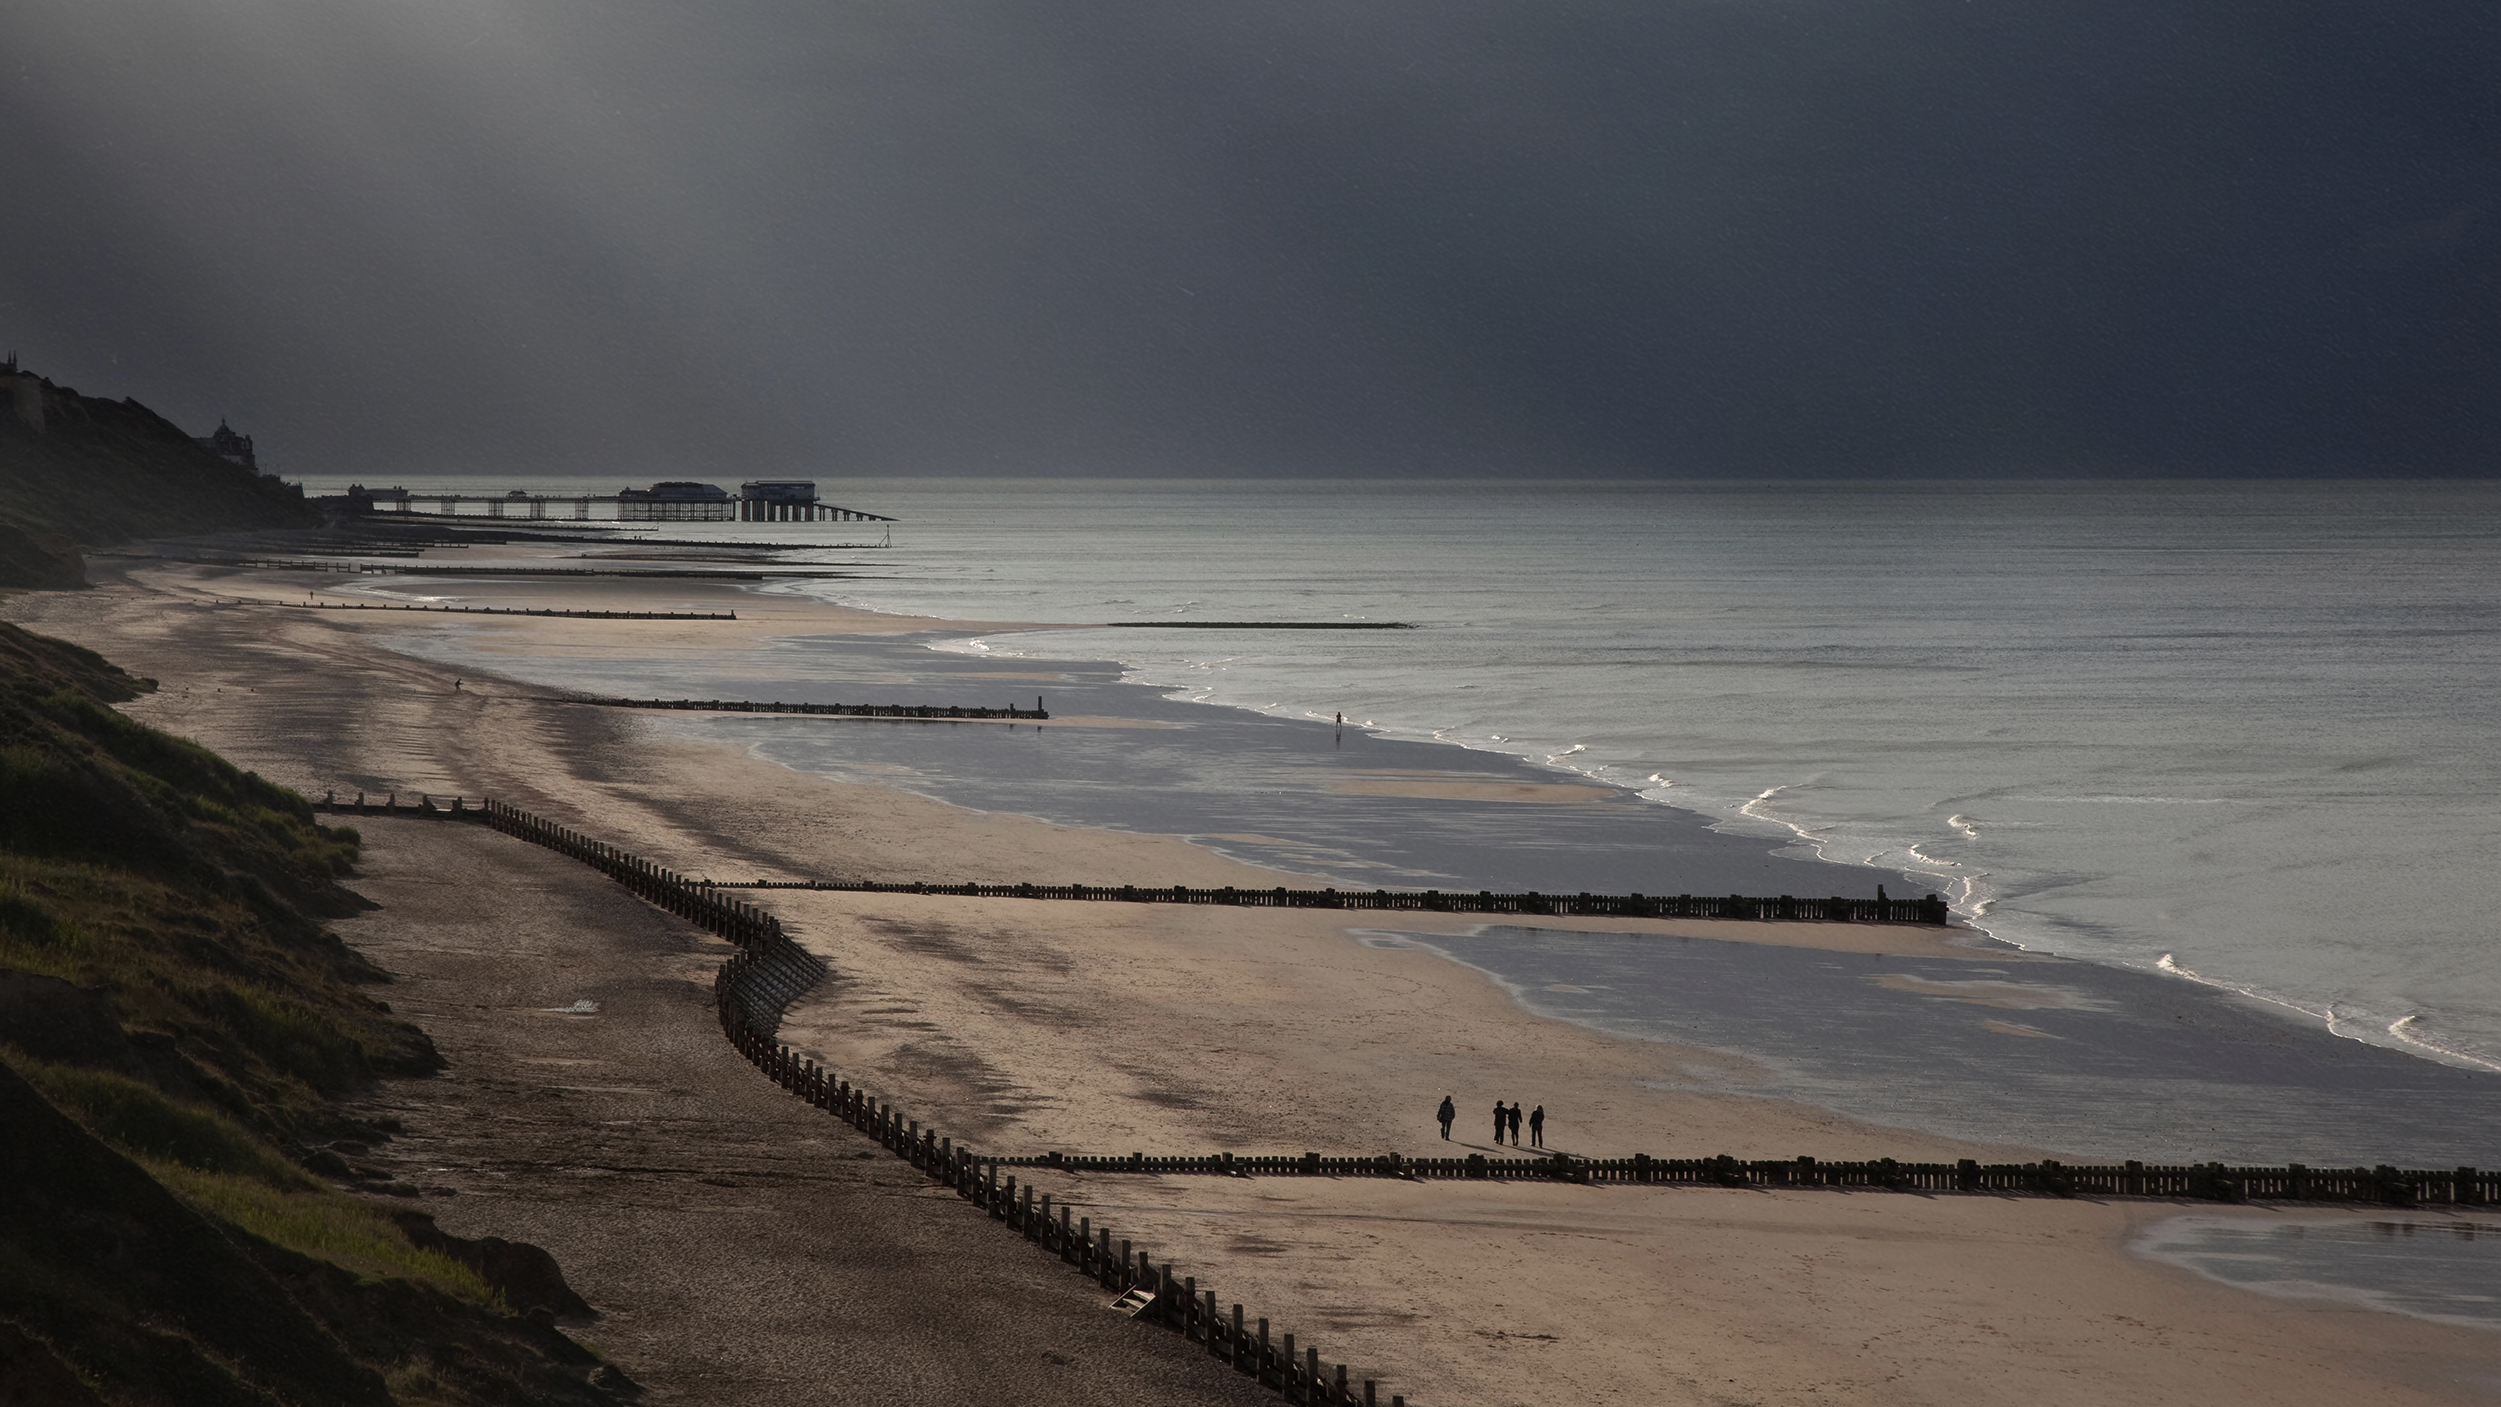 A serene beach scene at dusk with a distant pier, a few people walking along the shoreline, and gentle waves hitting the sand. The sky is cloudy with rays of light breaking through, hinting at the subtle potential for tidal power beneath the surface.